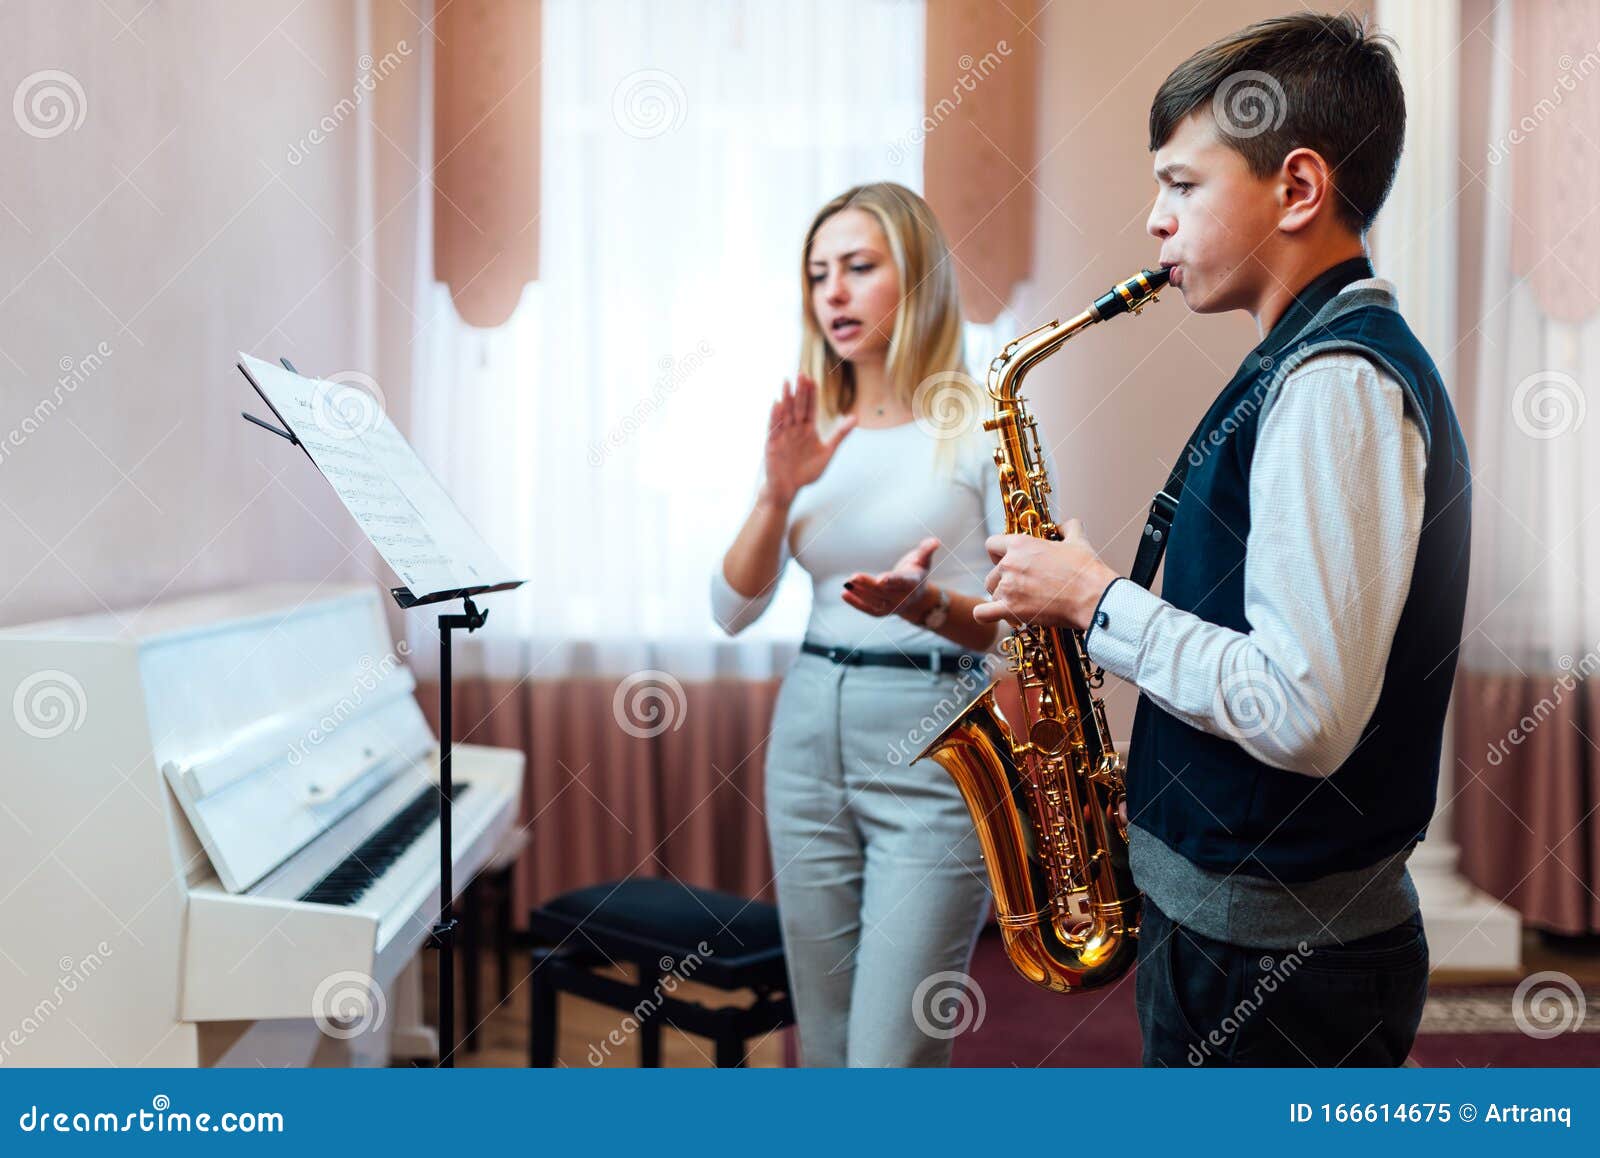 teacher claps instead of a metronome for a student on saxophone in music lesson that focuses on playing